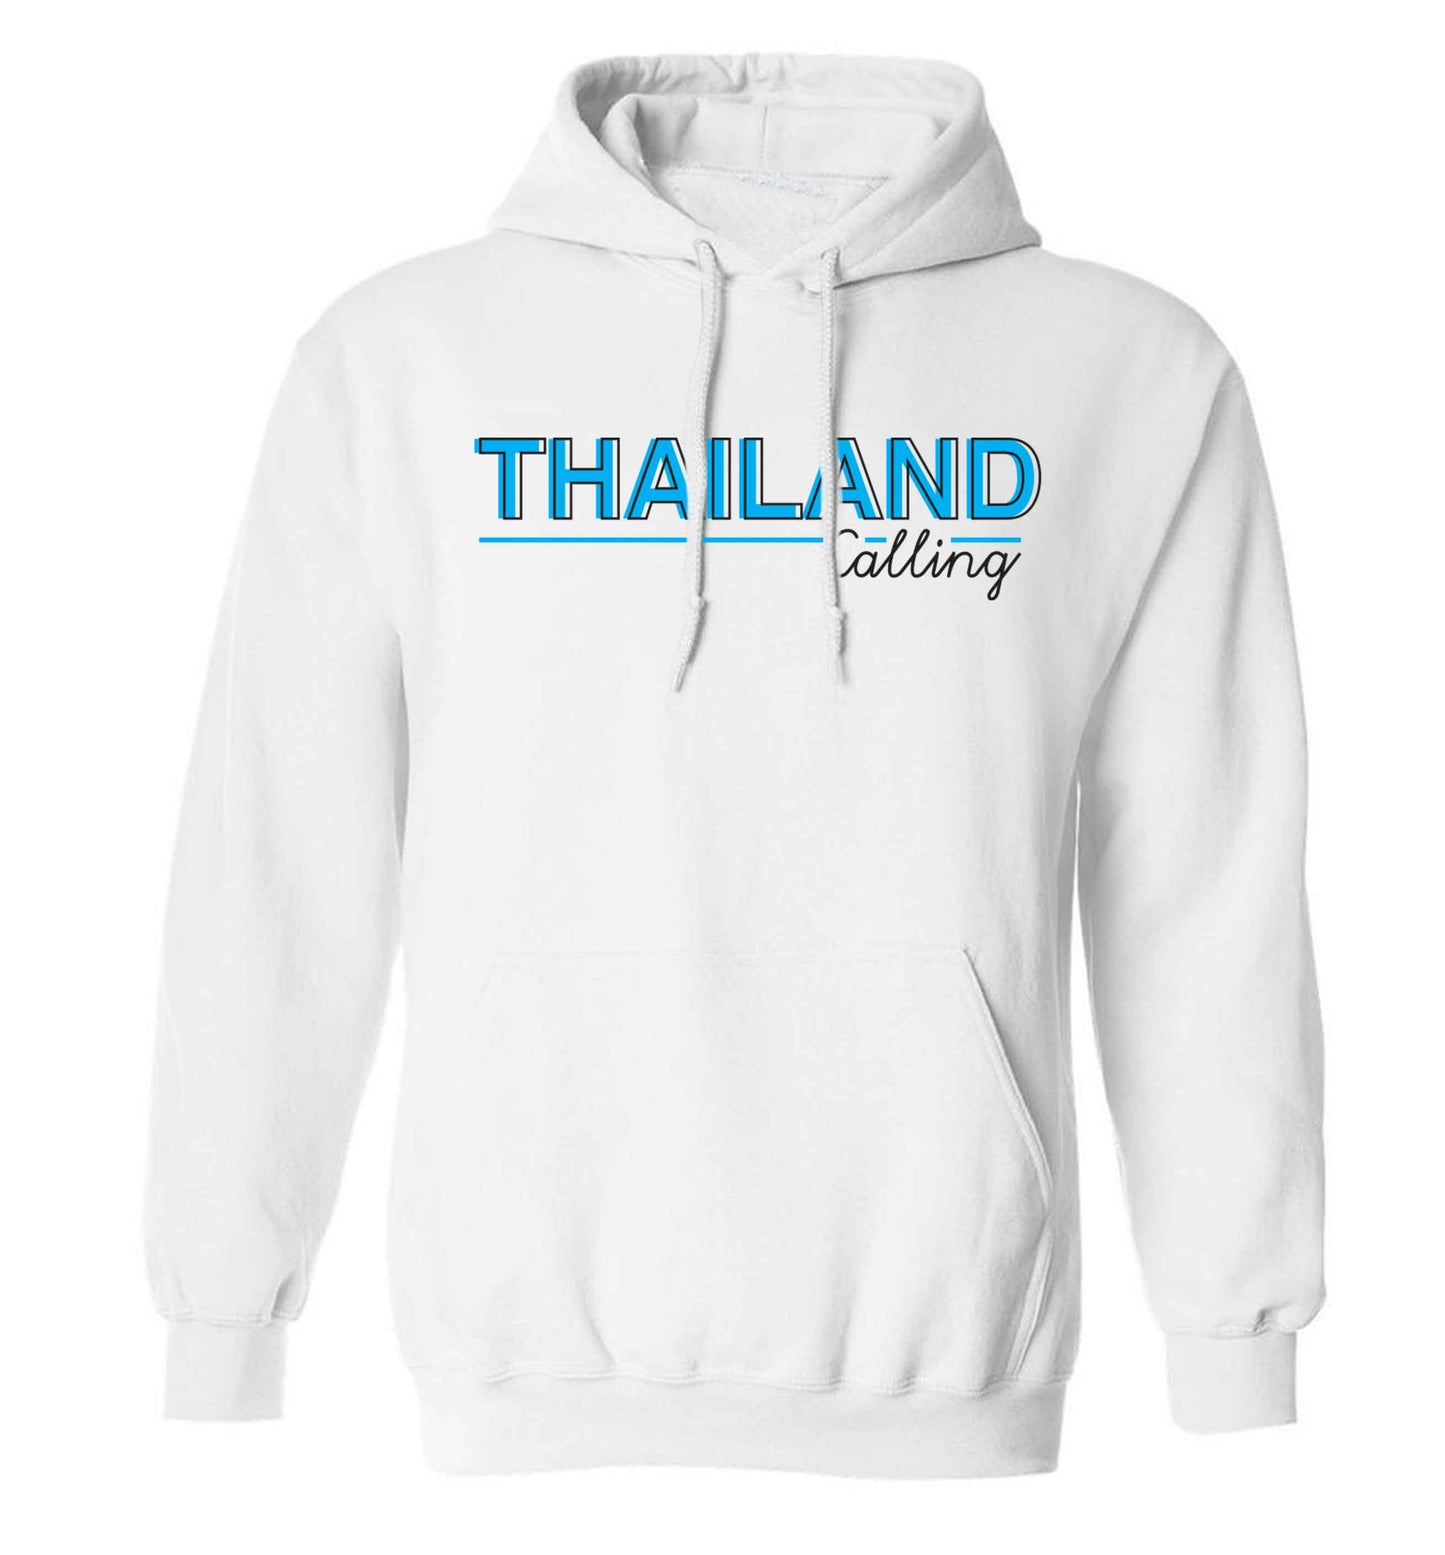 Thailand calling adults unisex white hoodie 2XL